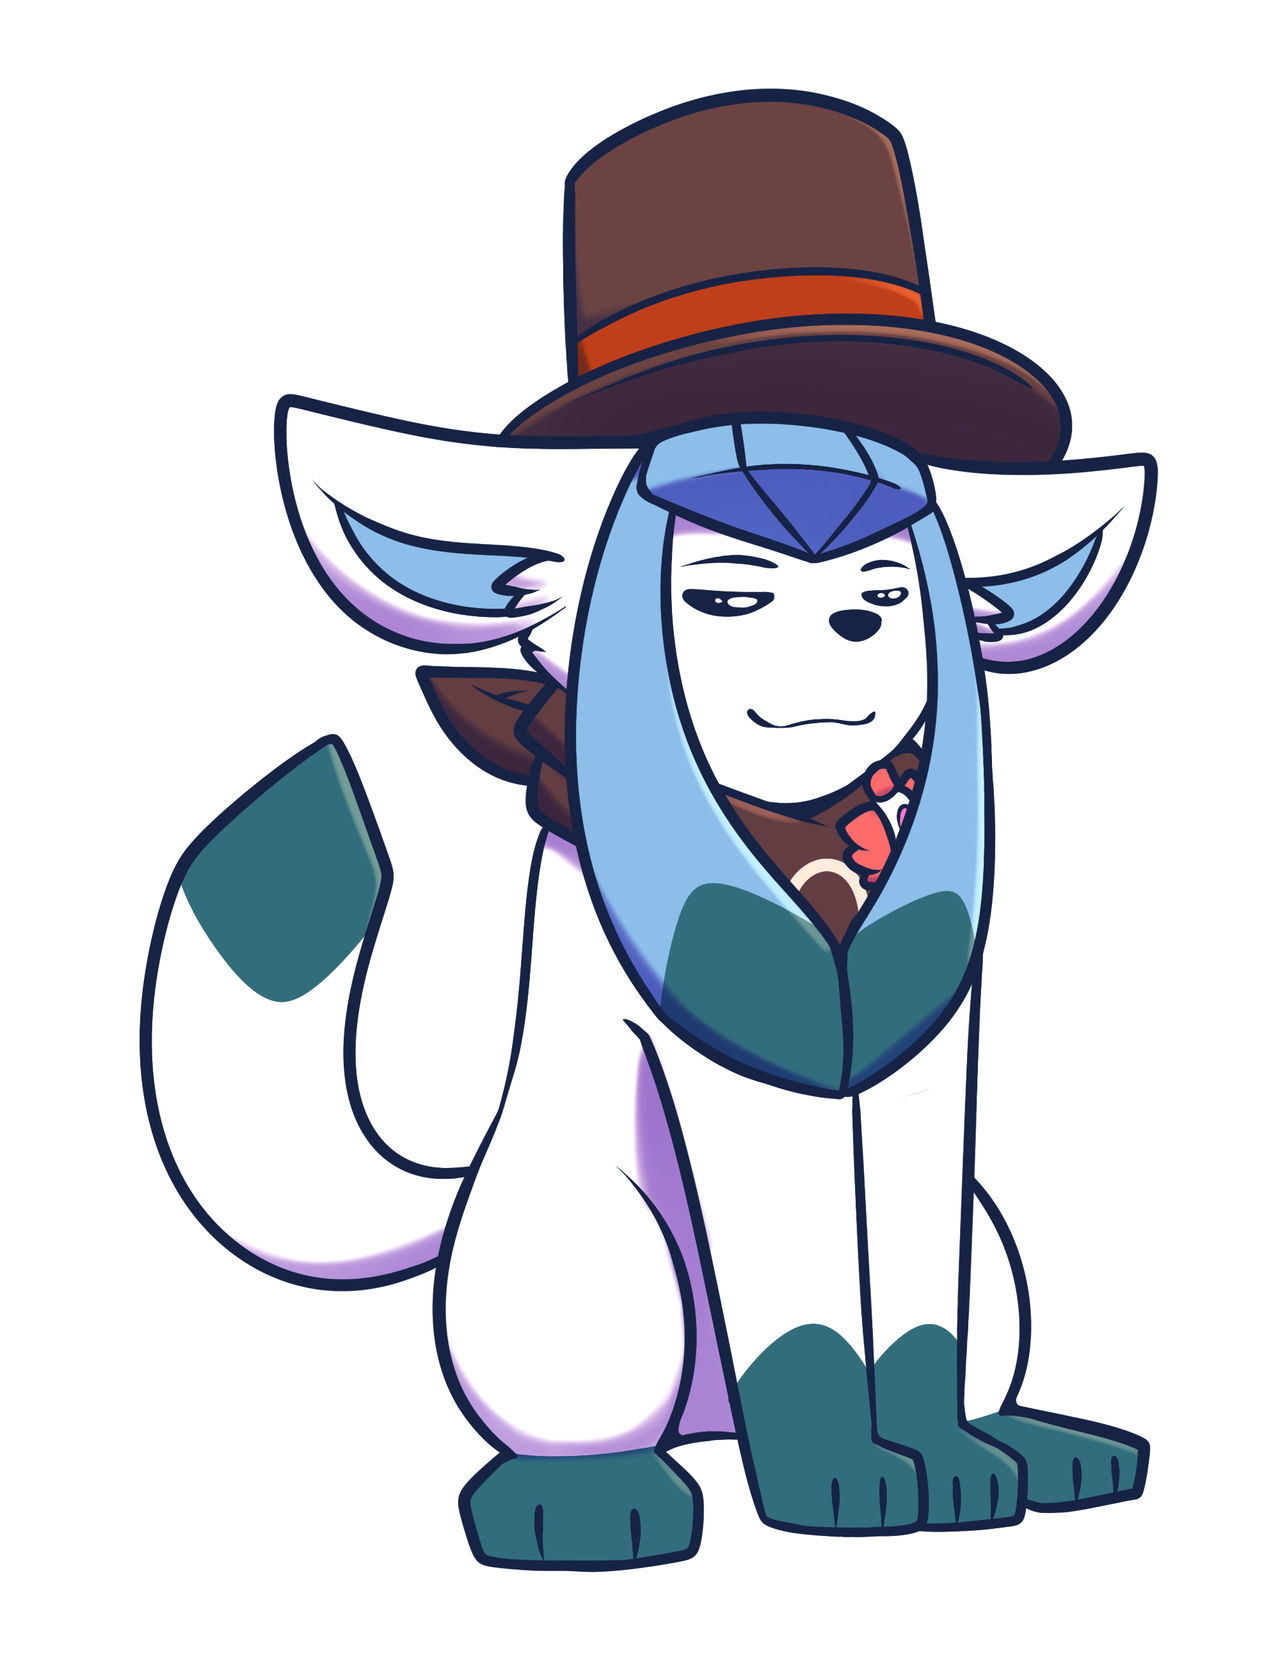 toby_the_glaceon__6_9__by_xael_the_artist_de4i6m2-fullview.jpg